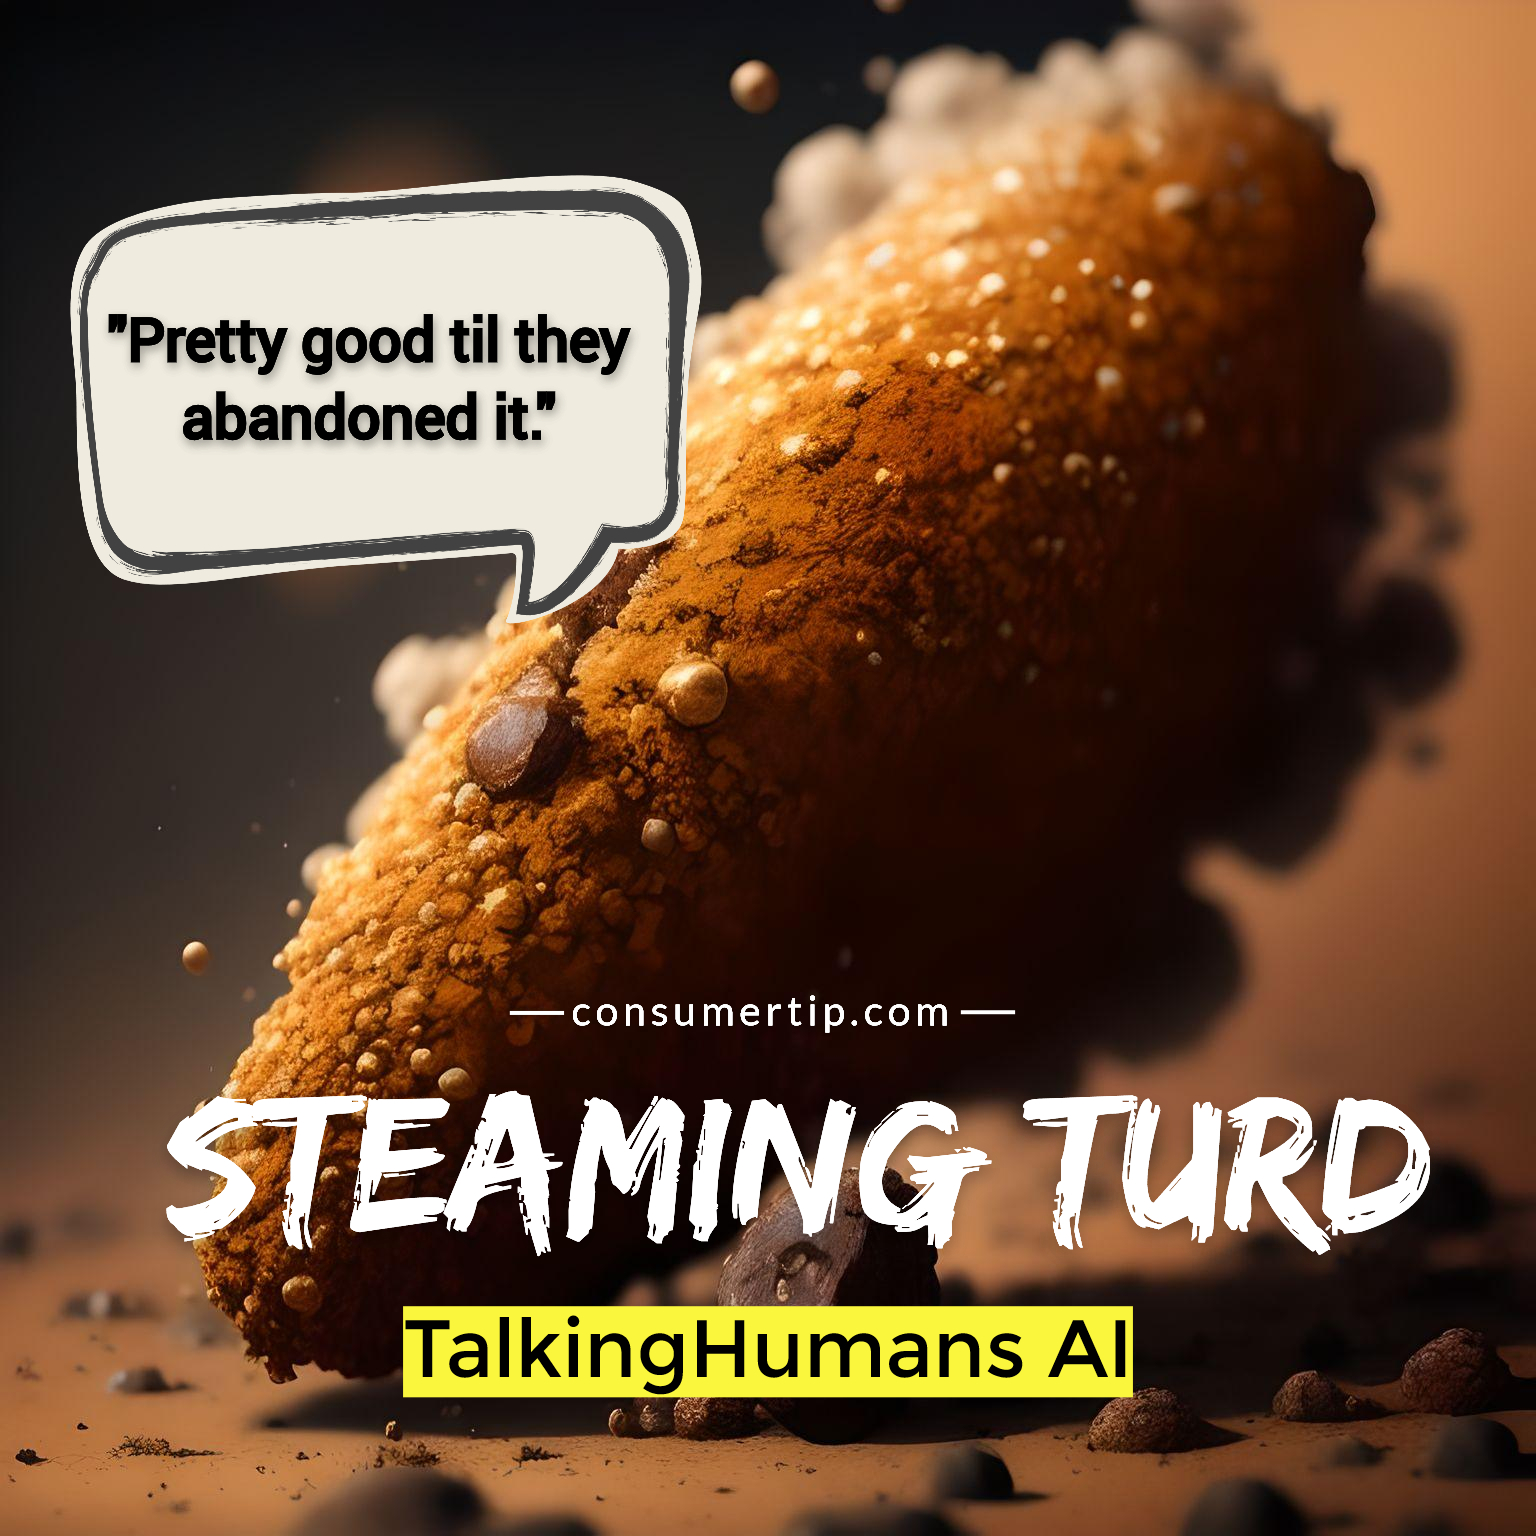 TalkingHumans AI Human Voiceovers Software Abandoned in Scam